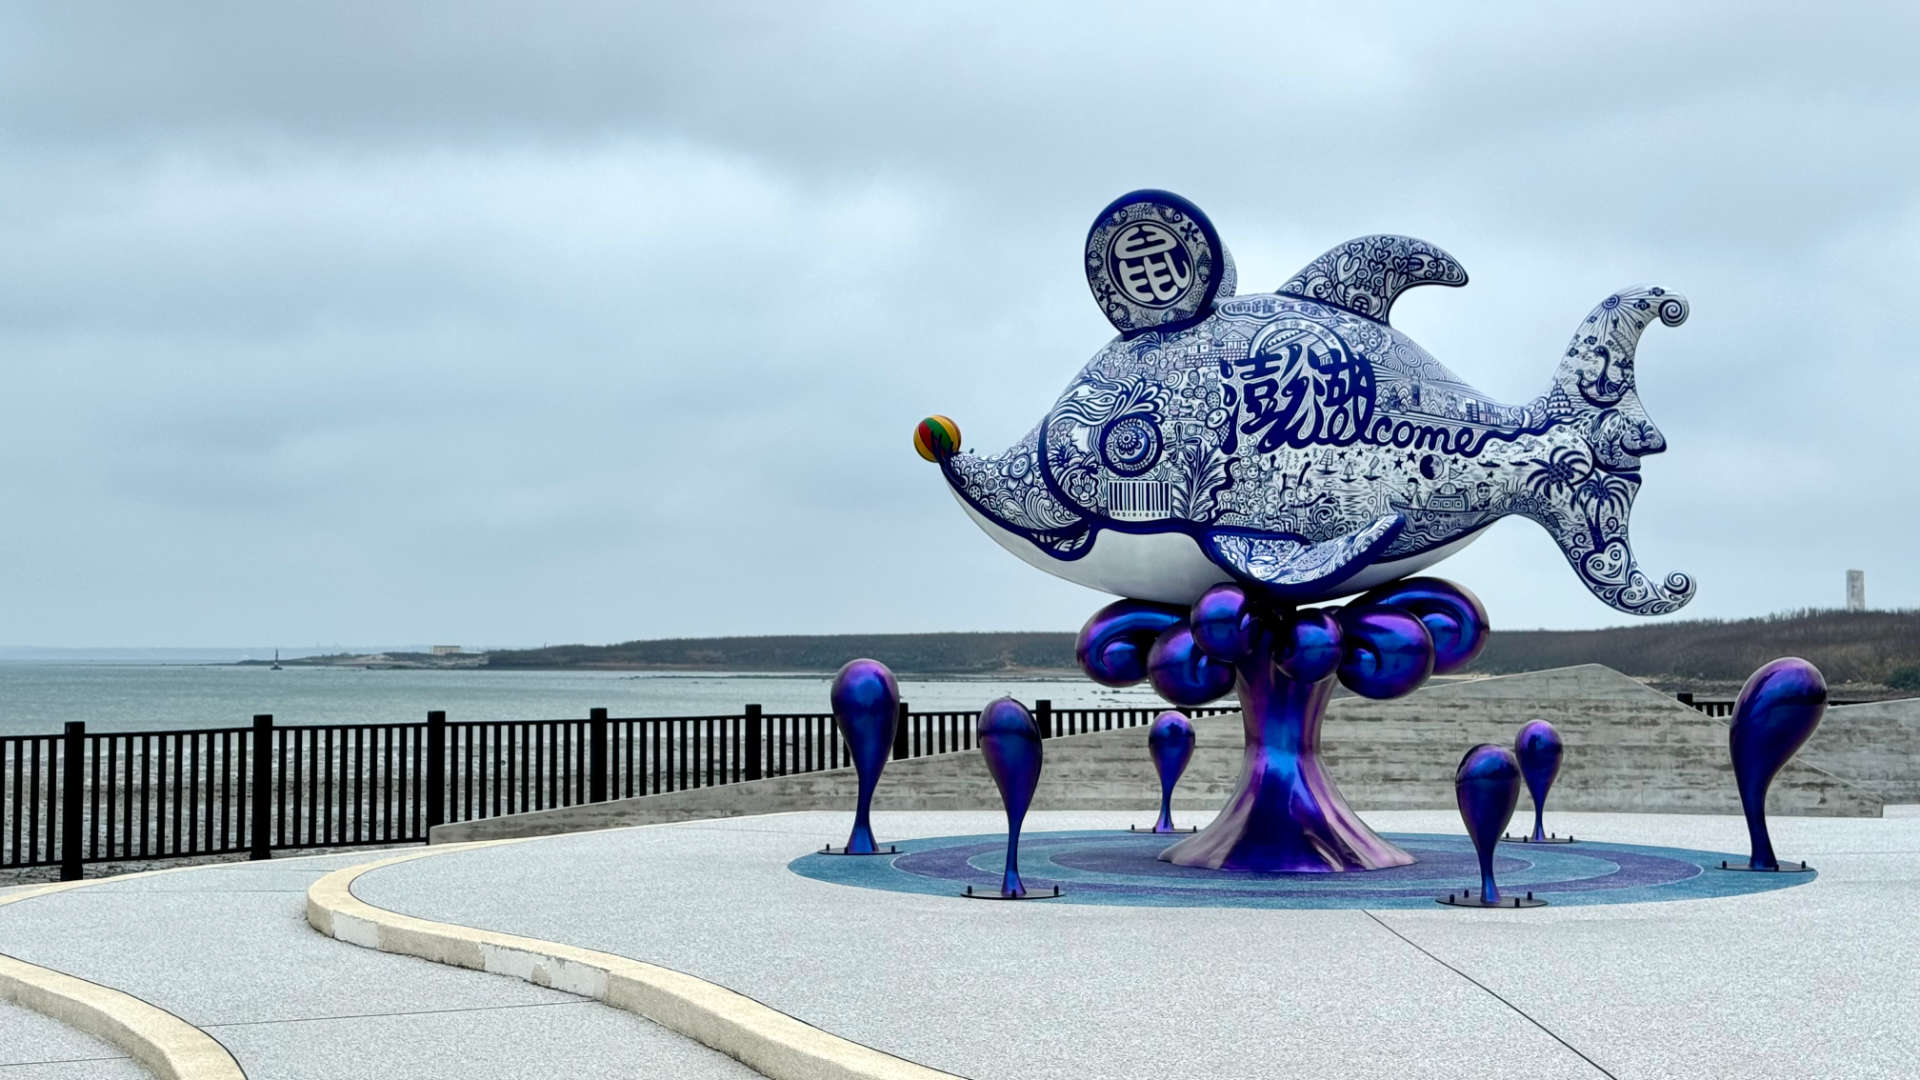 A fish statue at the seaside, facing out to sea, with the word ‘welcome’ on its side.